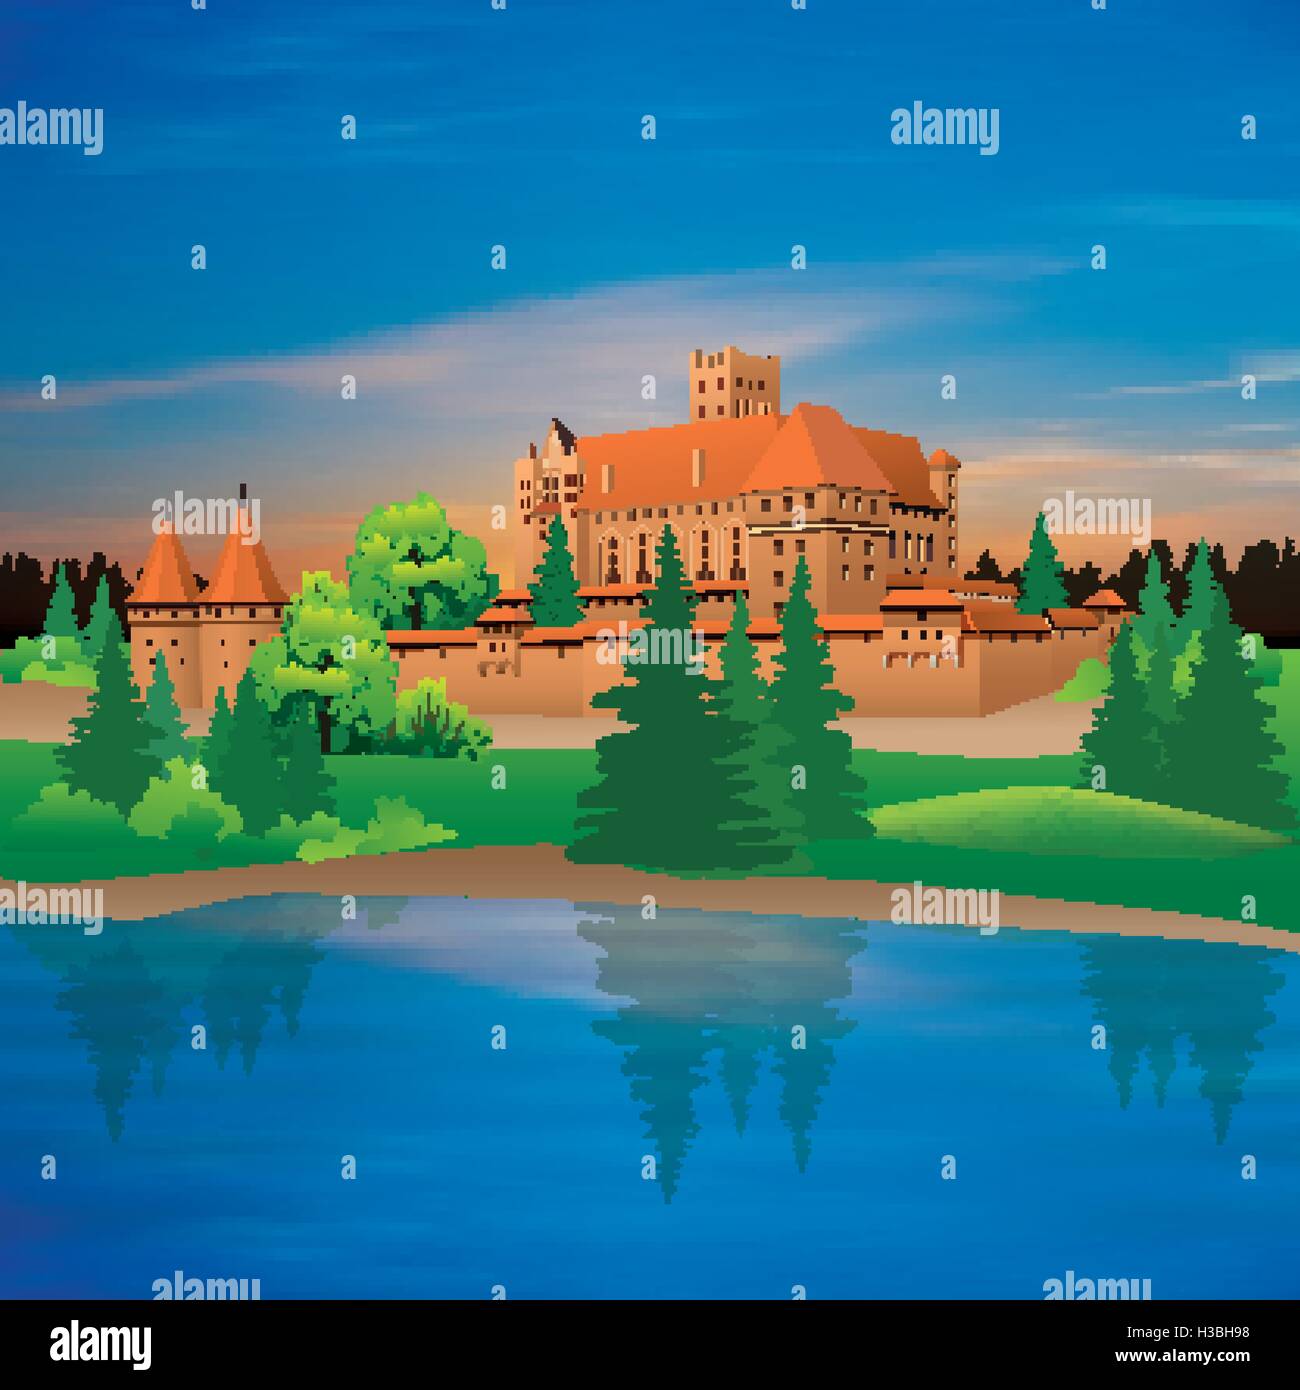 hand drawing castle and river vector Illustration Stock Vector